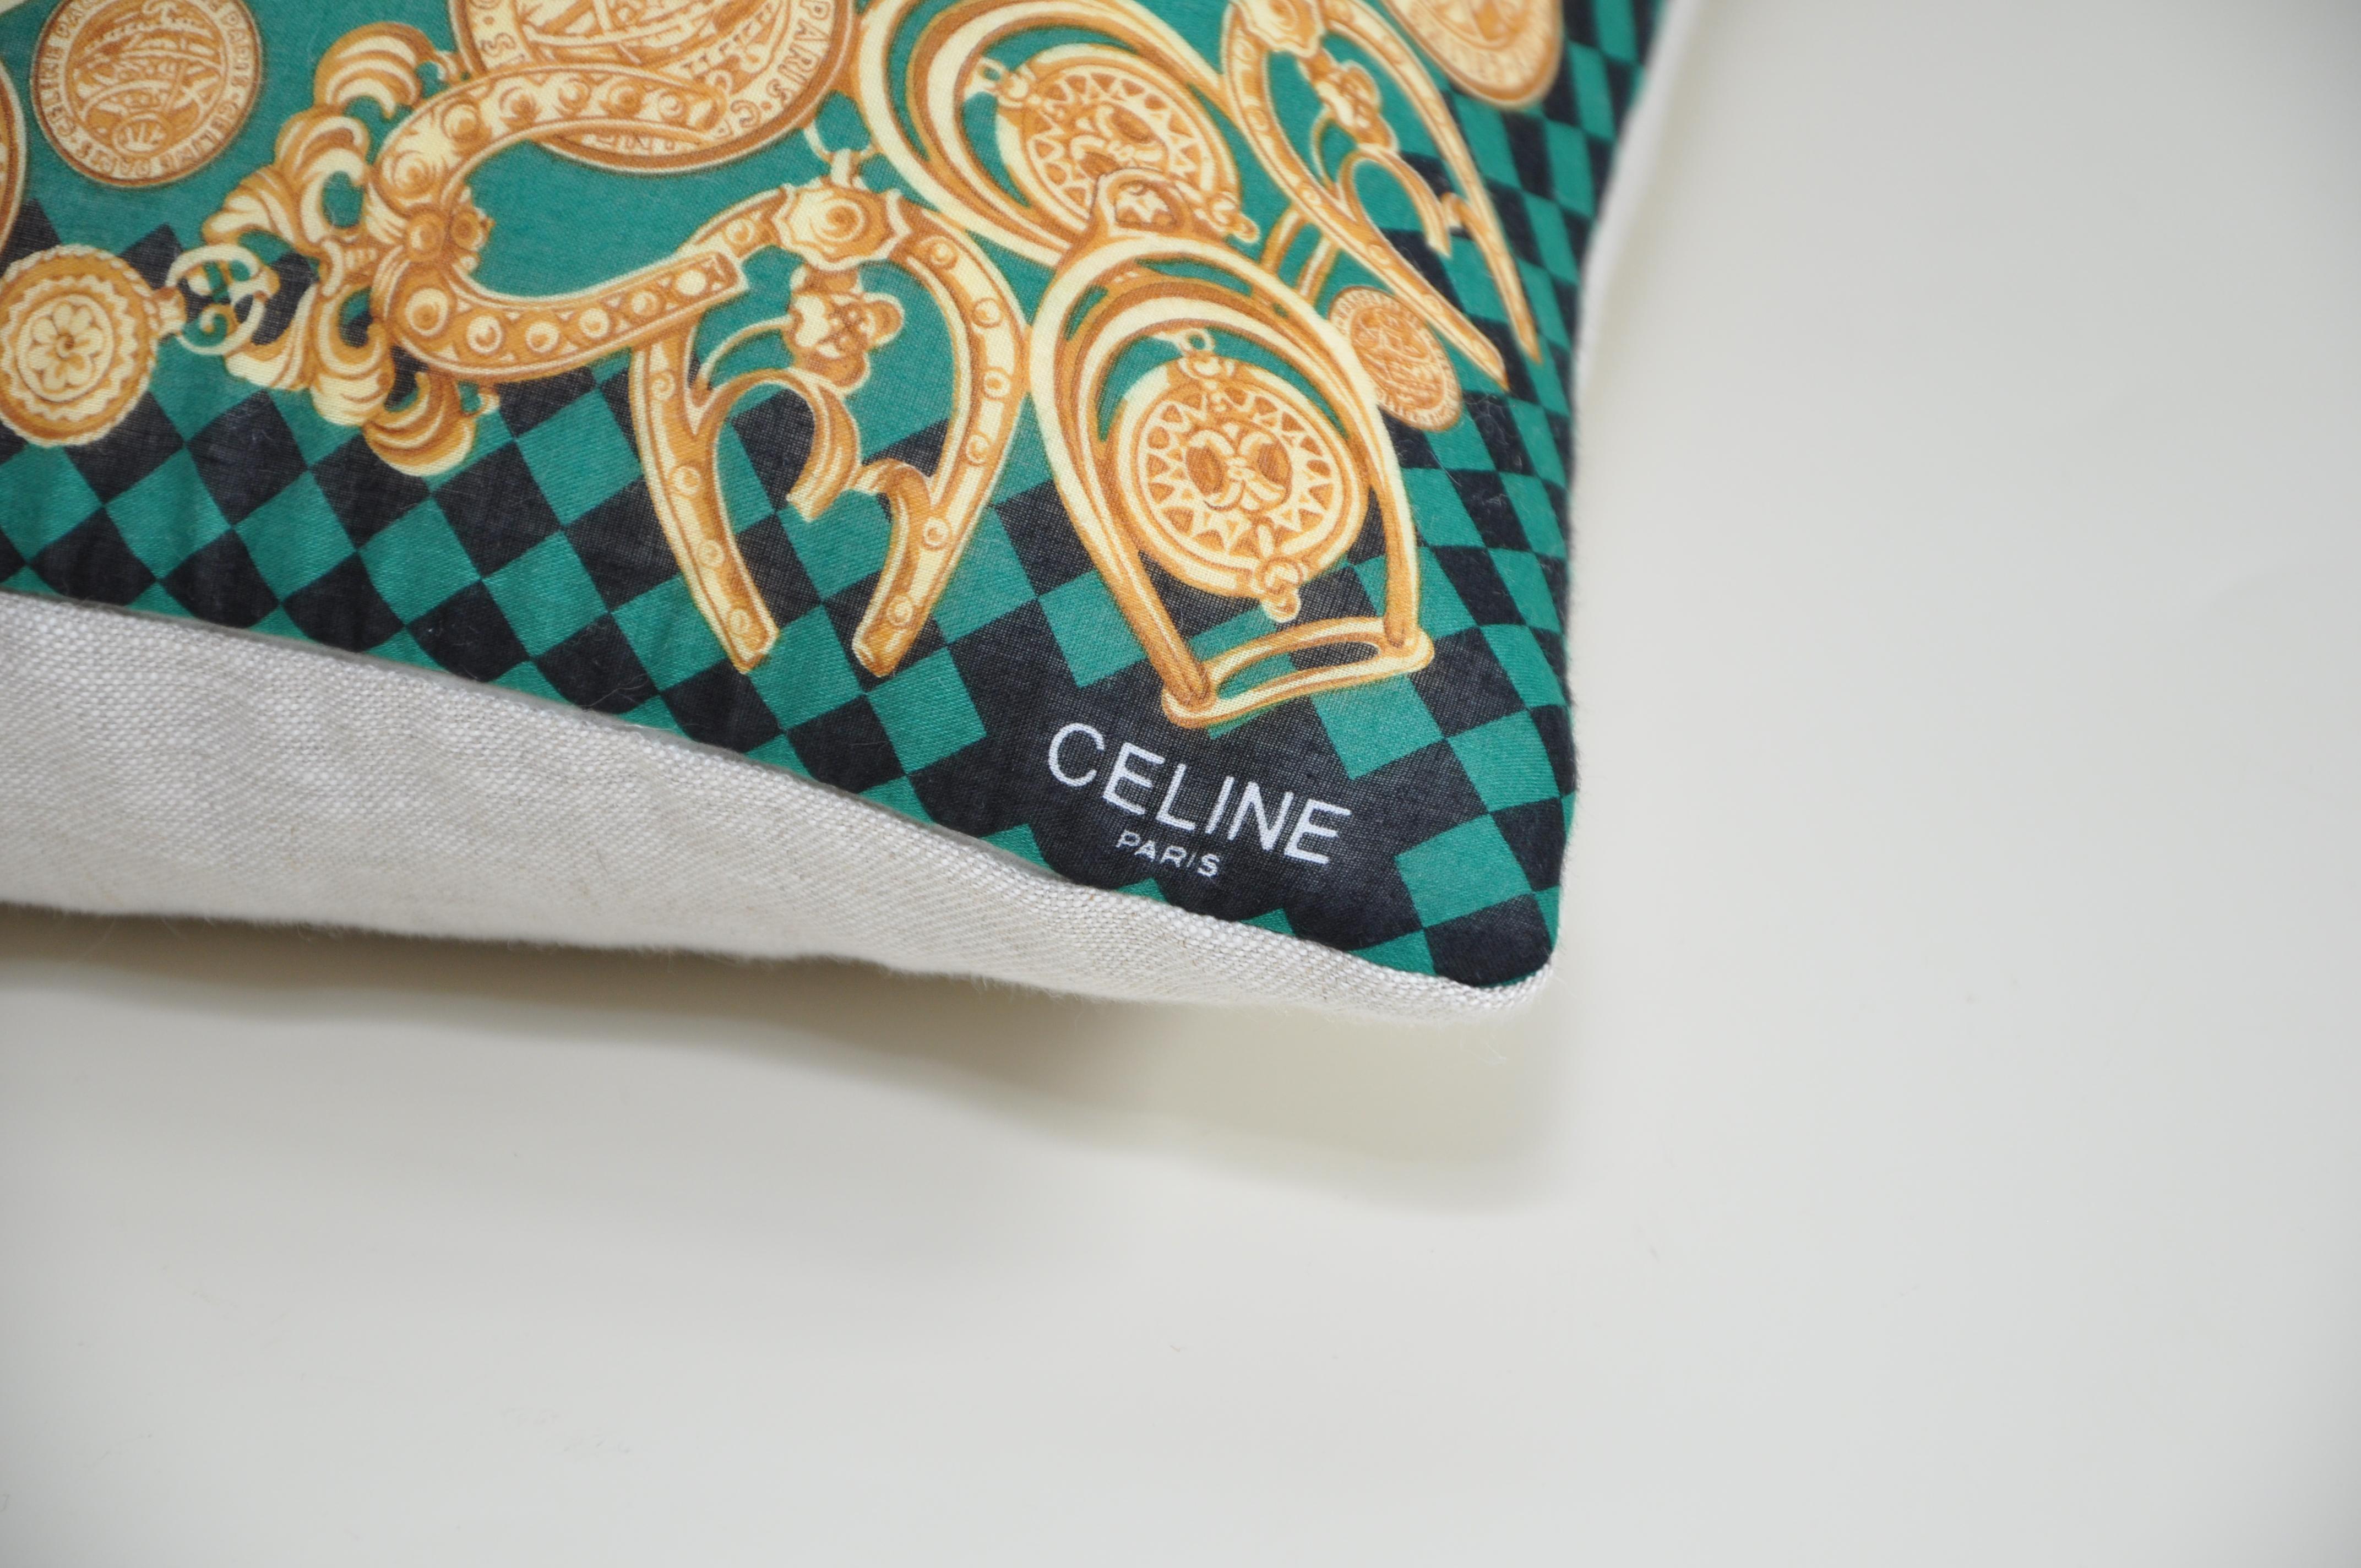 Title:
Katie Larmour vintage Celine scarf backed in pure Irish Linen cushion pillow green gold

Description:
This gem is a one-of-a-kind custom made luxury cushion (pillow) from an exquisite vintage Celine fashion scarf in a very unique and